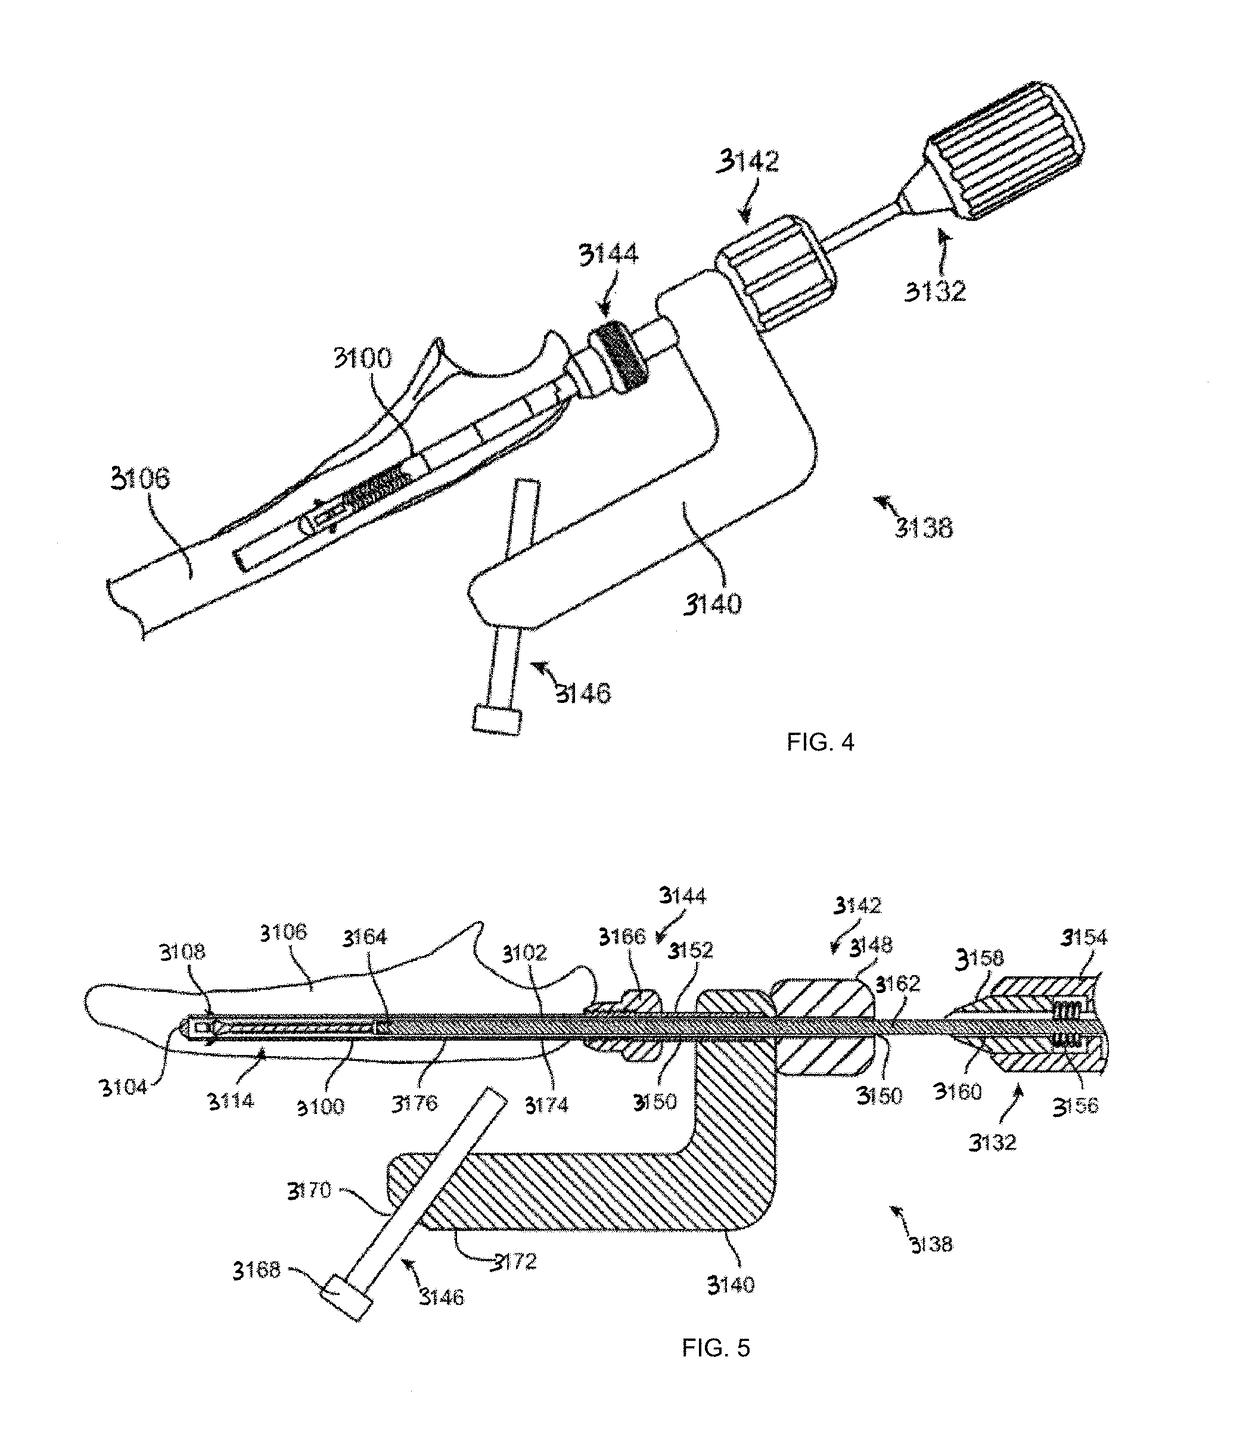 Intramedullary fracture fixation devices and methods